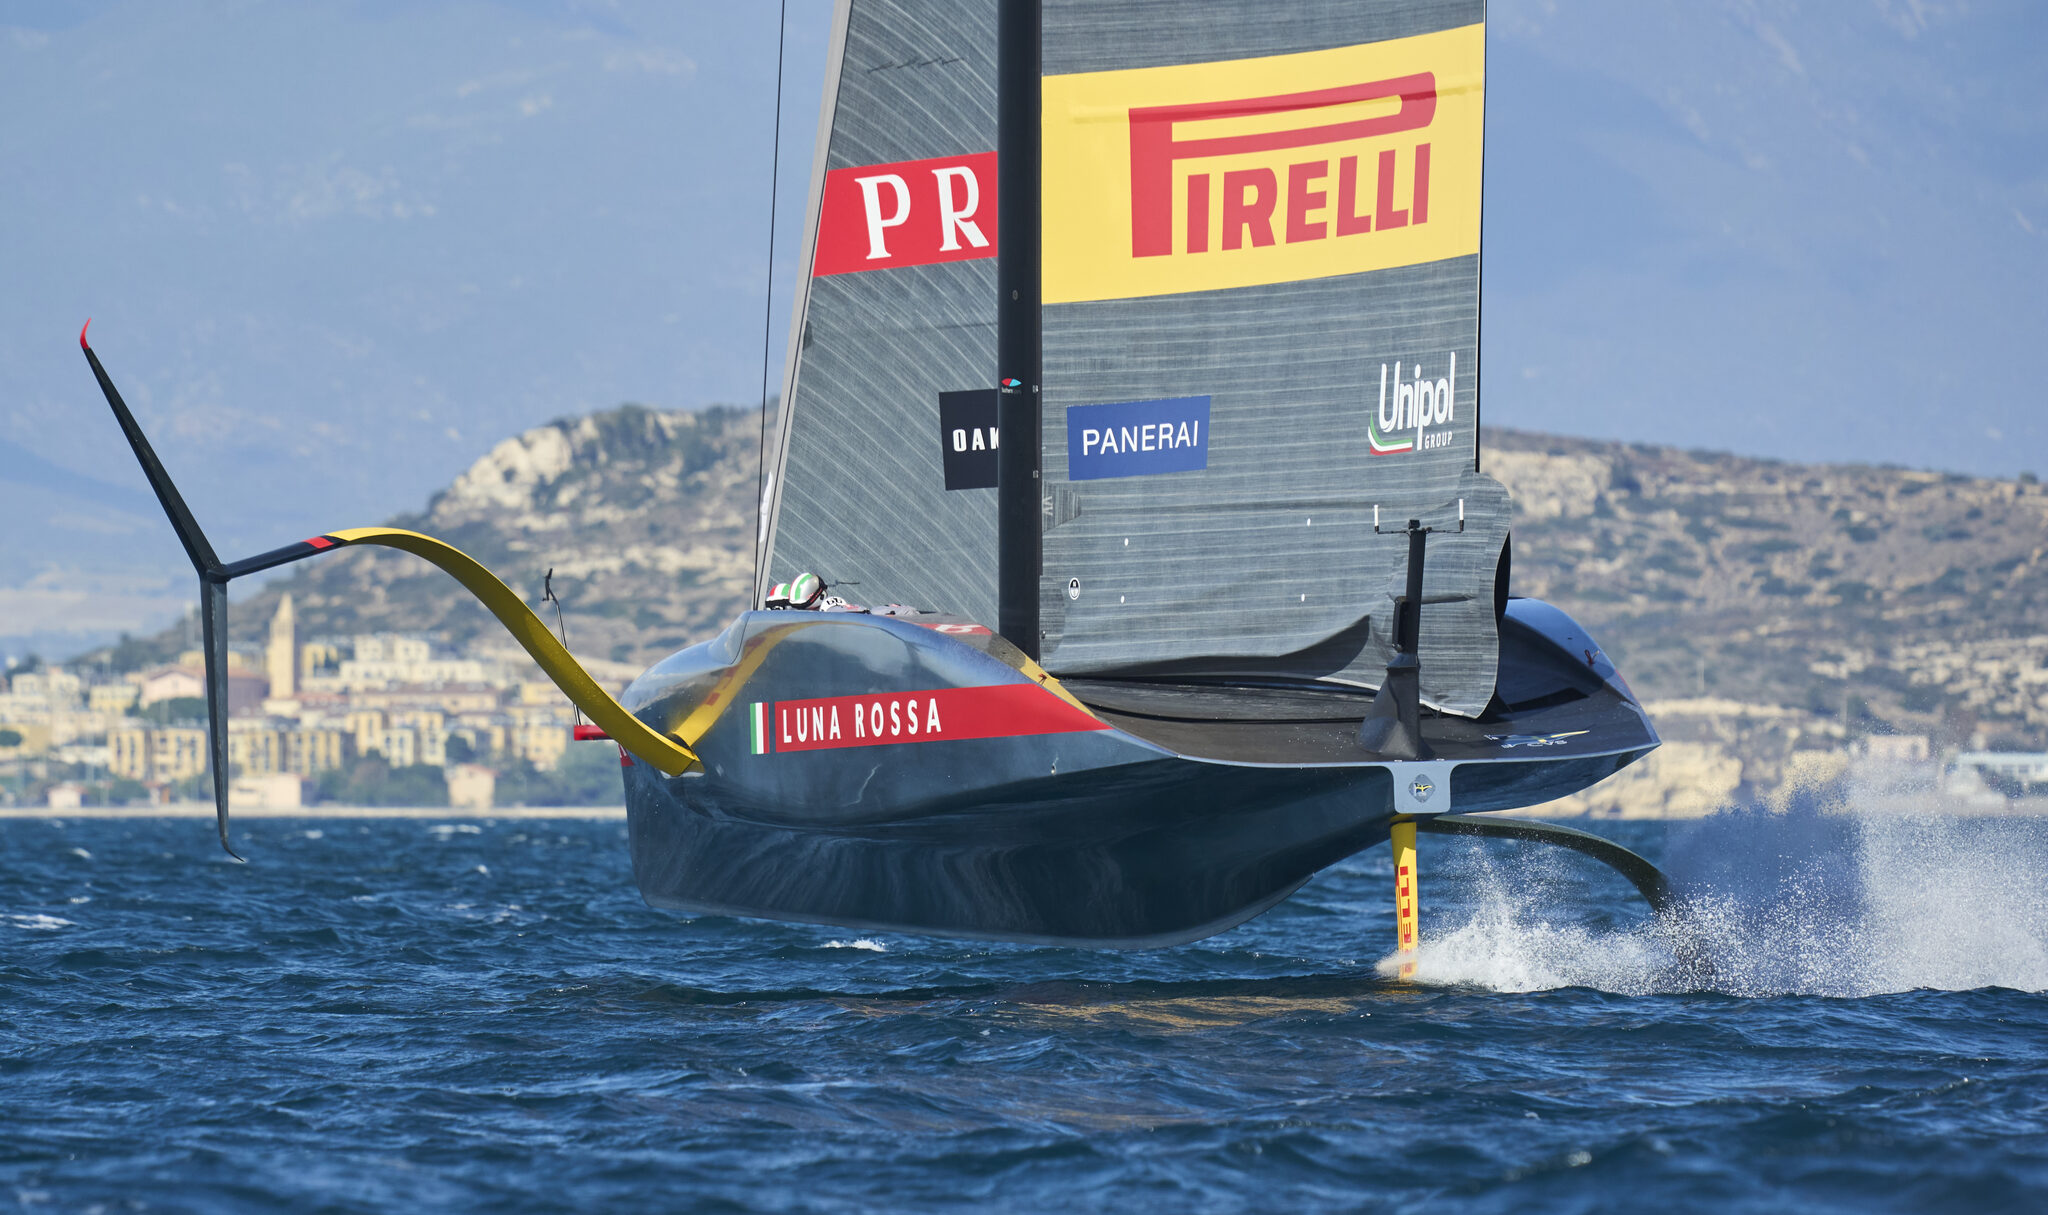 A support boat from the Pirelli Luna Rossa team alongside the caravels on the high seas.